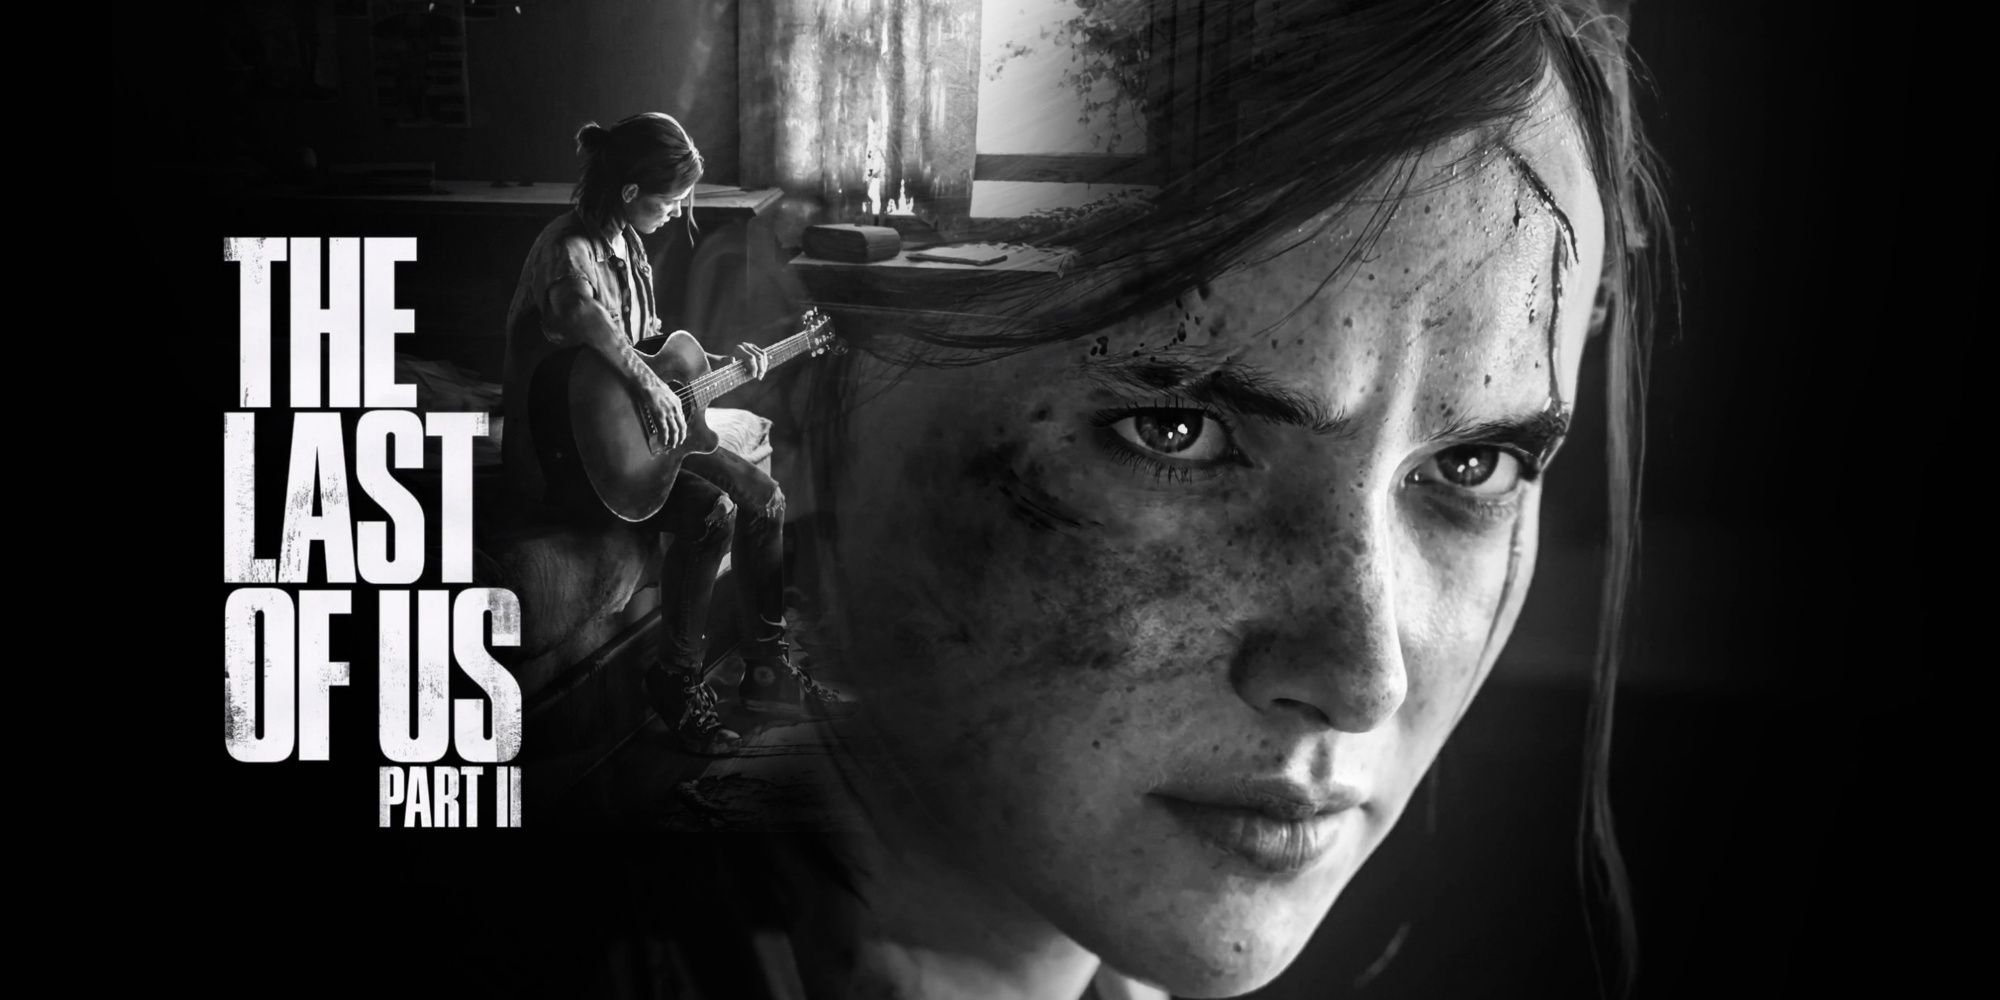 The Last of Us Part 2 game art featuring Ellie playing guitar and a close-up of her face